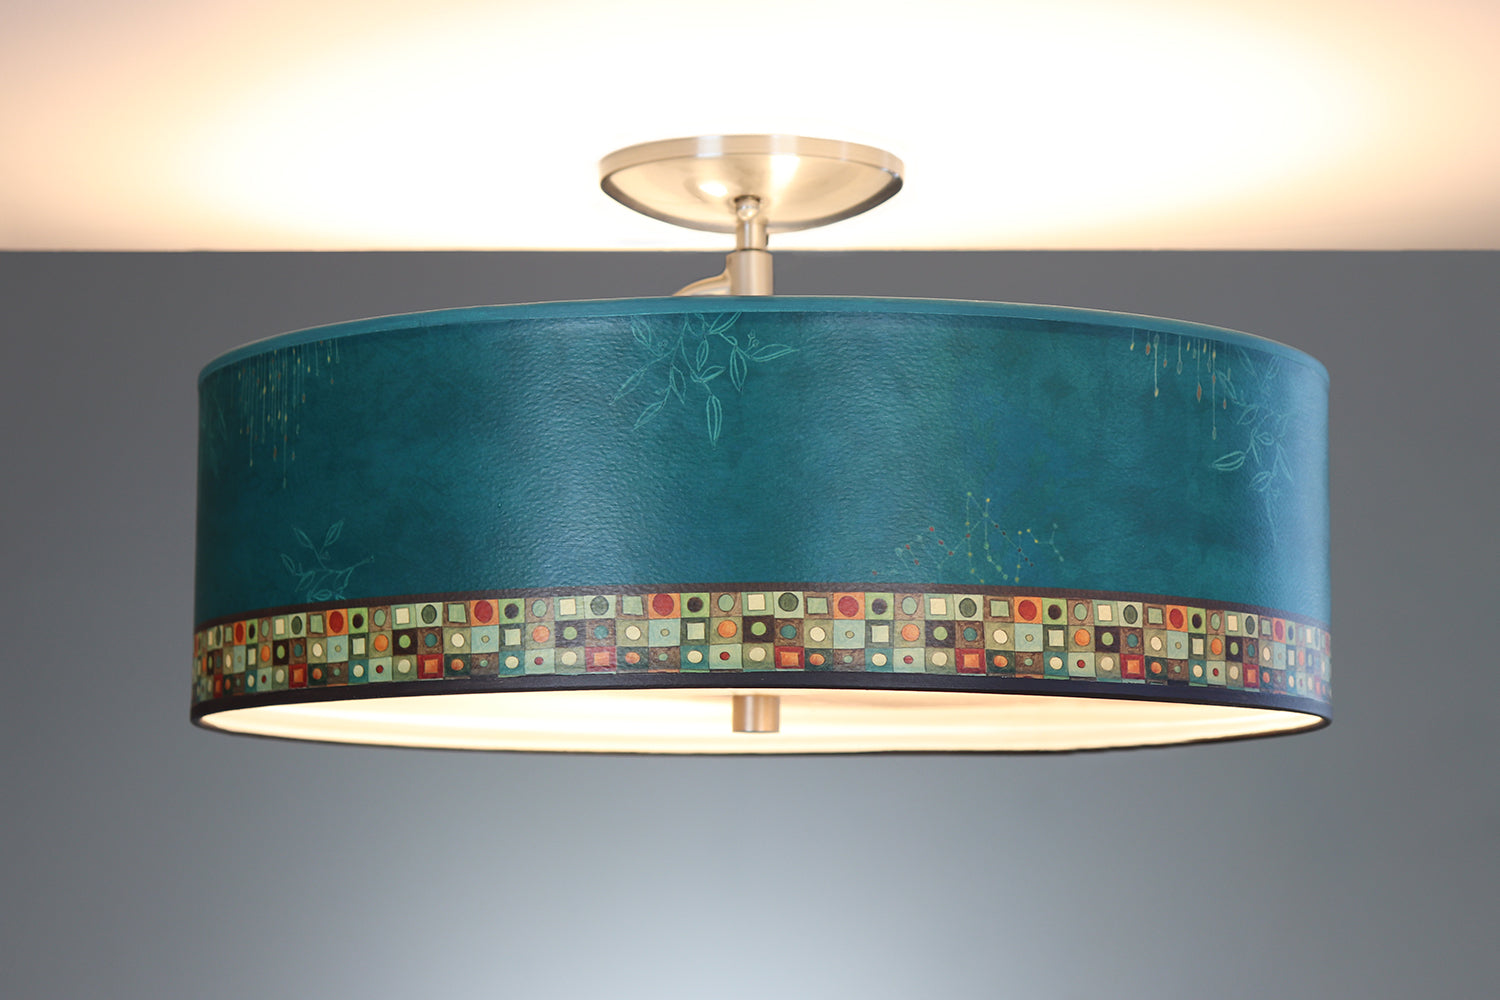 Janna Ugone & Co Ceiling Fixture 16" / Raw Brass Ceiling Lamp in Jade Mosaic